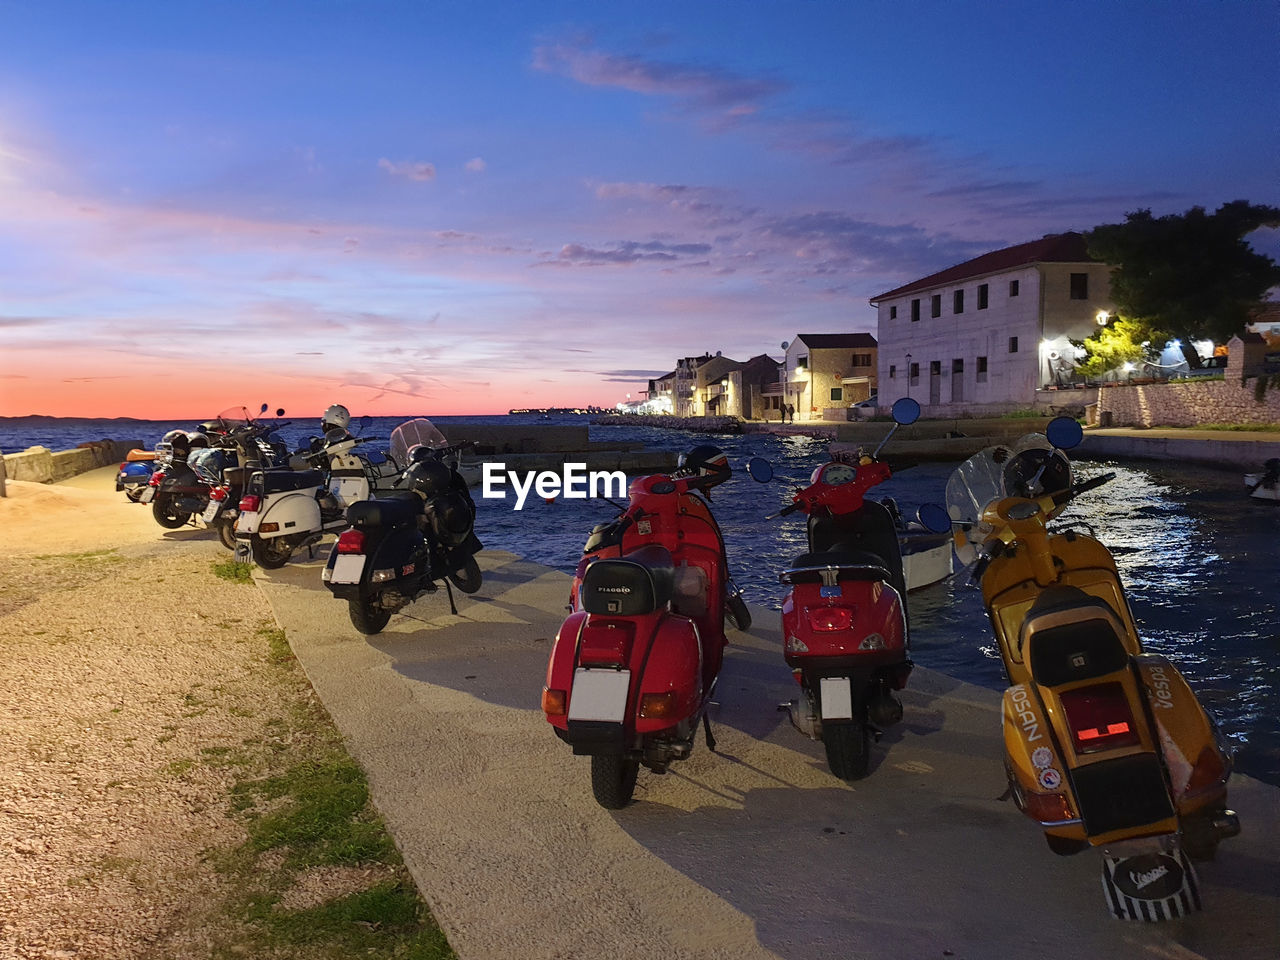 Vespa scooters parked in a row by the sea against sunset sky